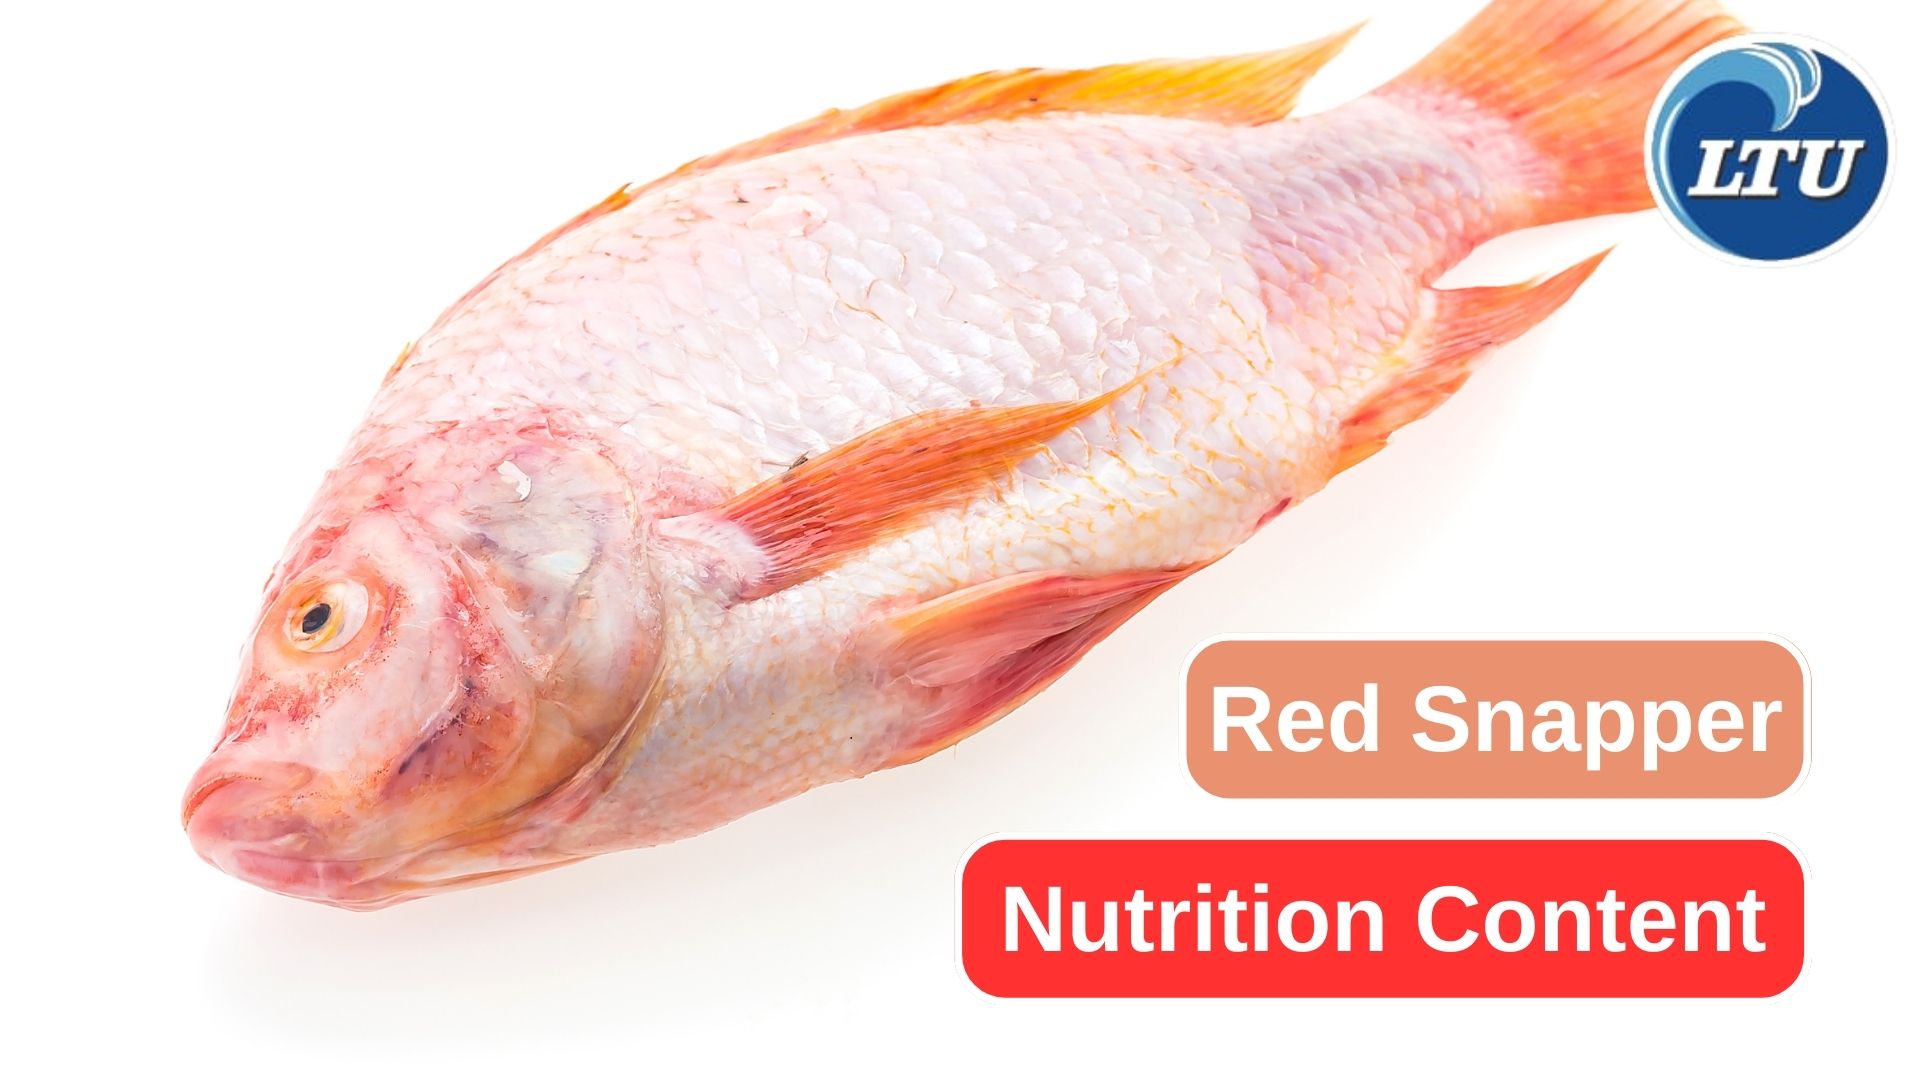 7 Essential Nutrition Content in Red Snapper 